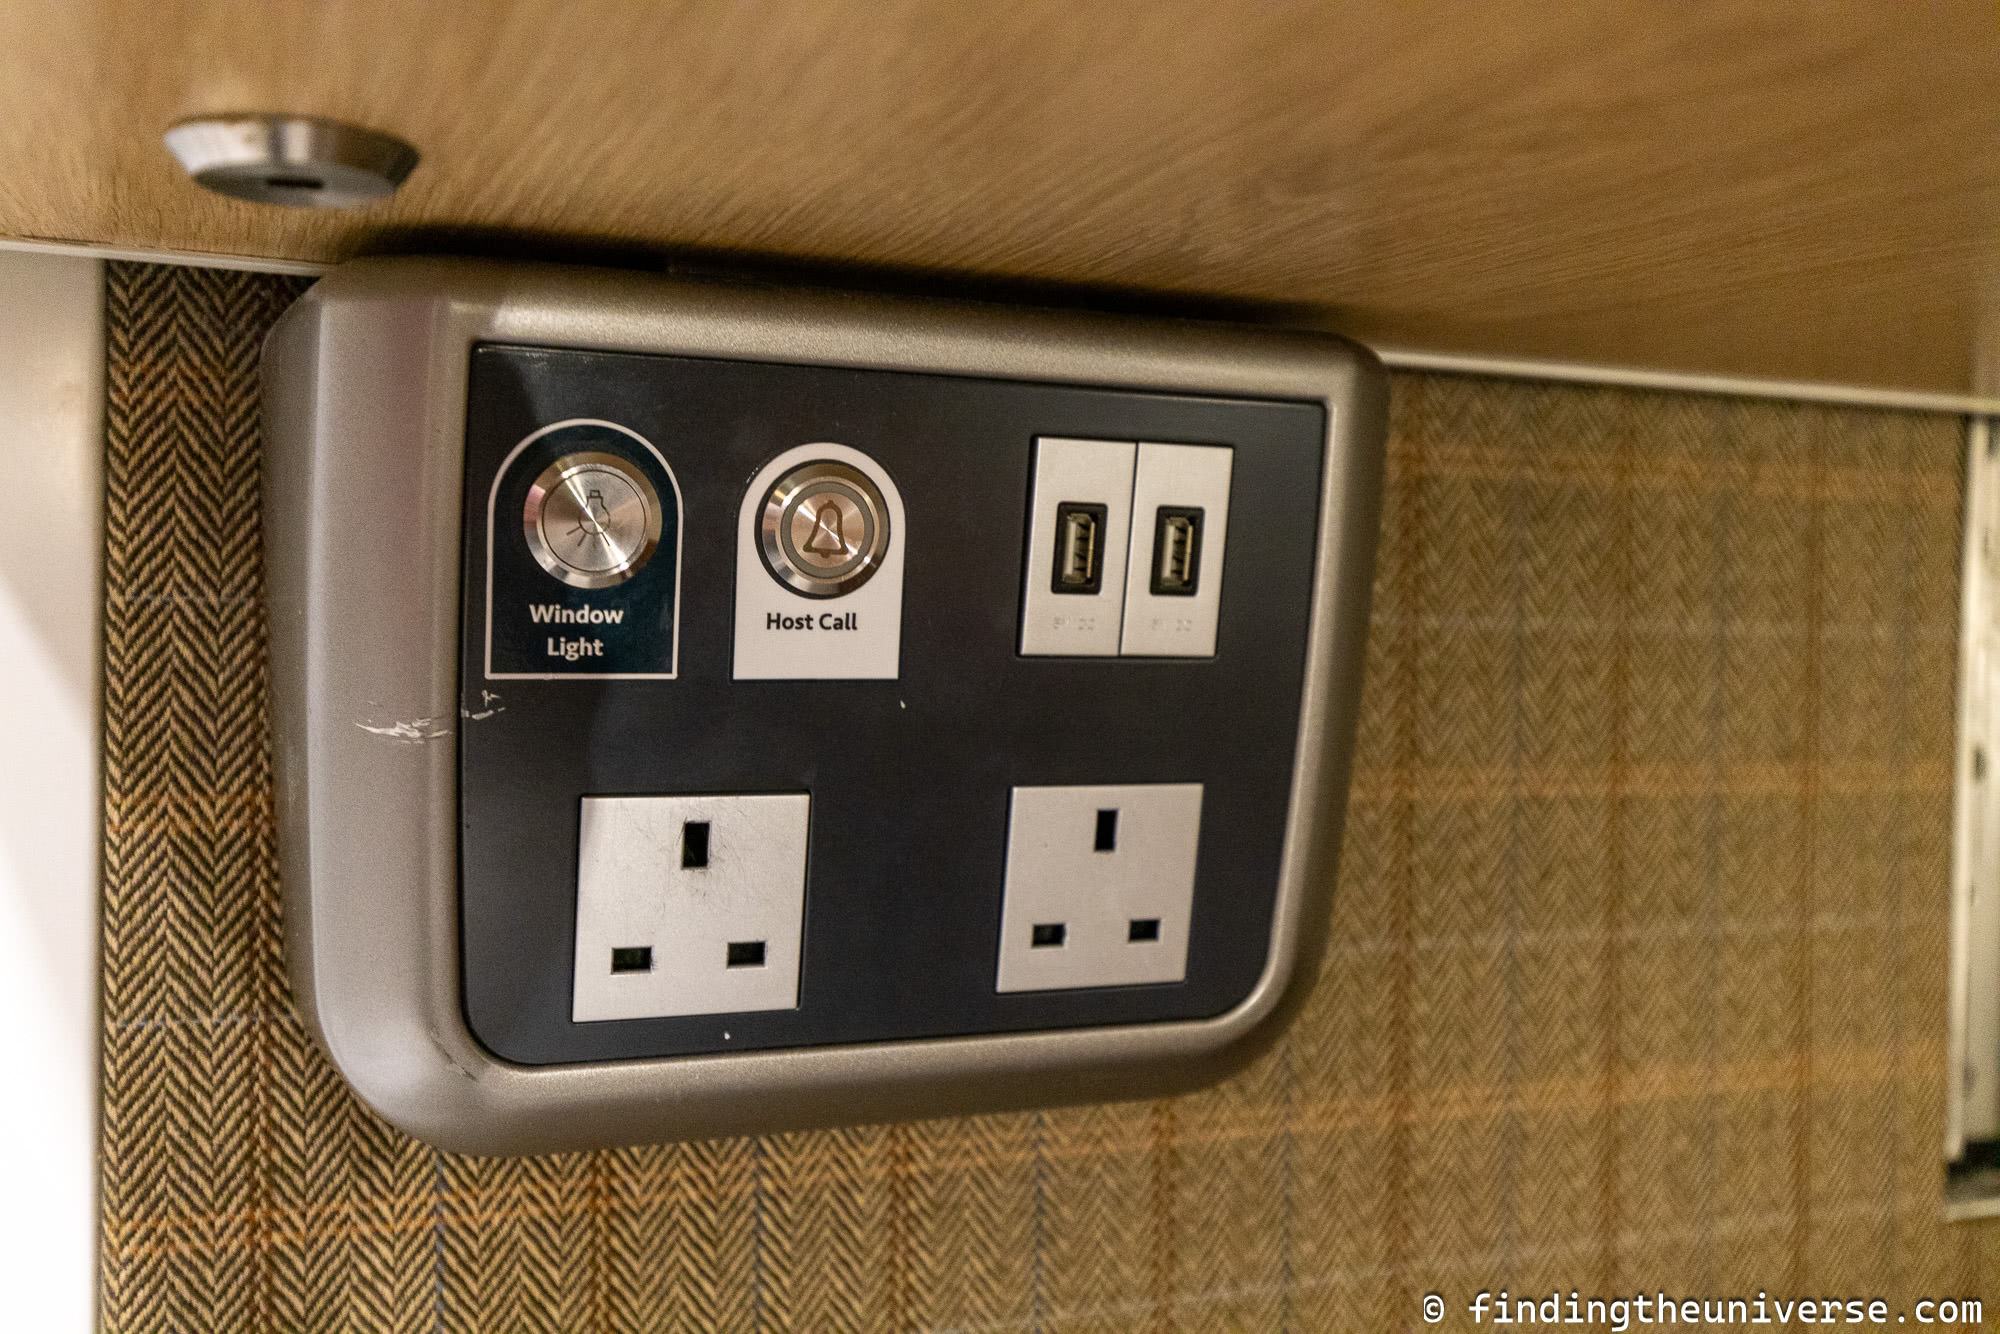 Caledonian Sleeper train power outlets by Laurence Norah